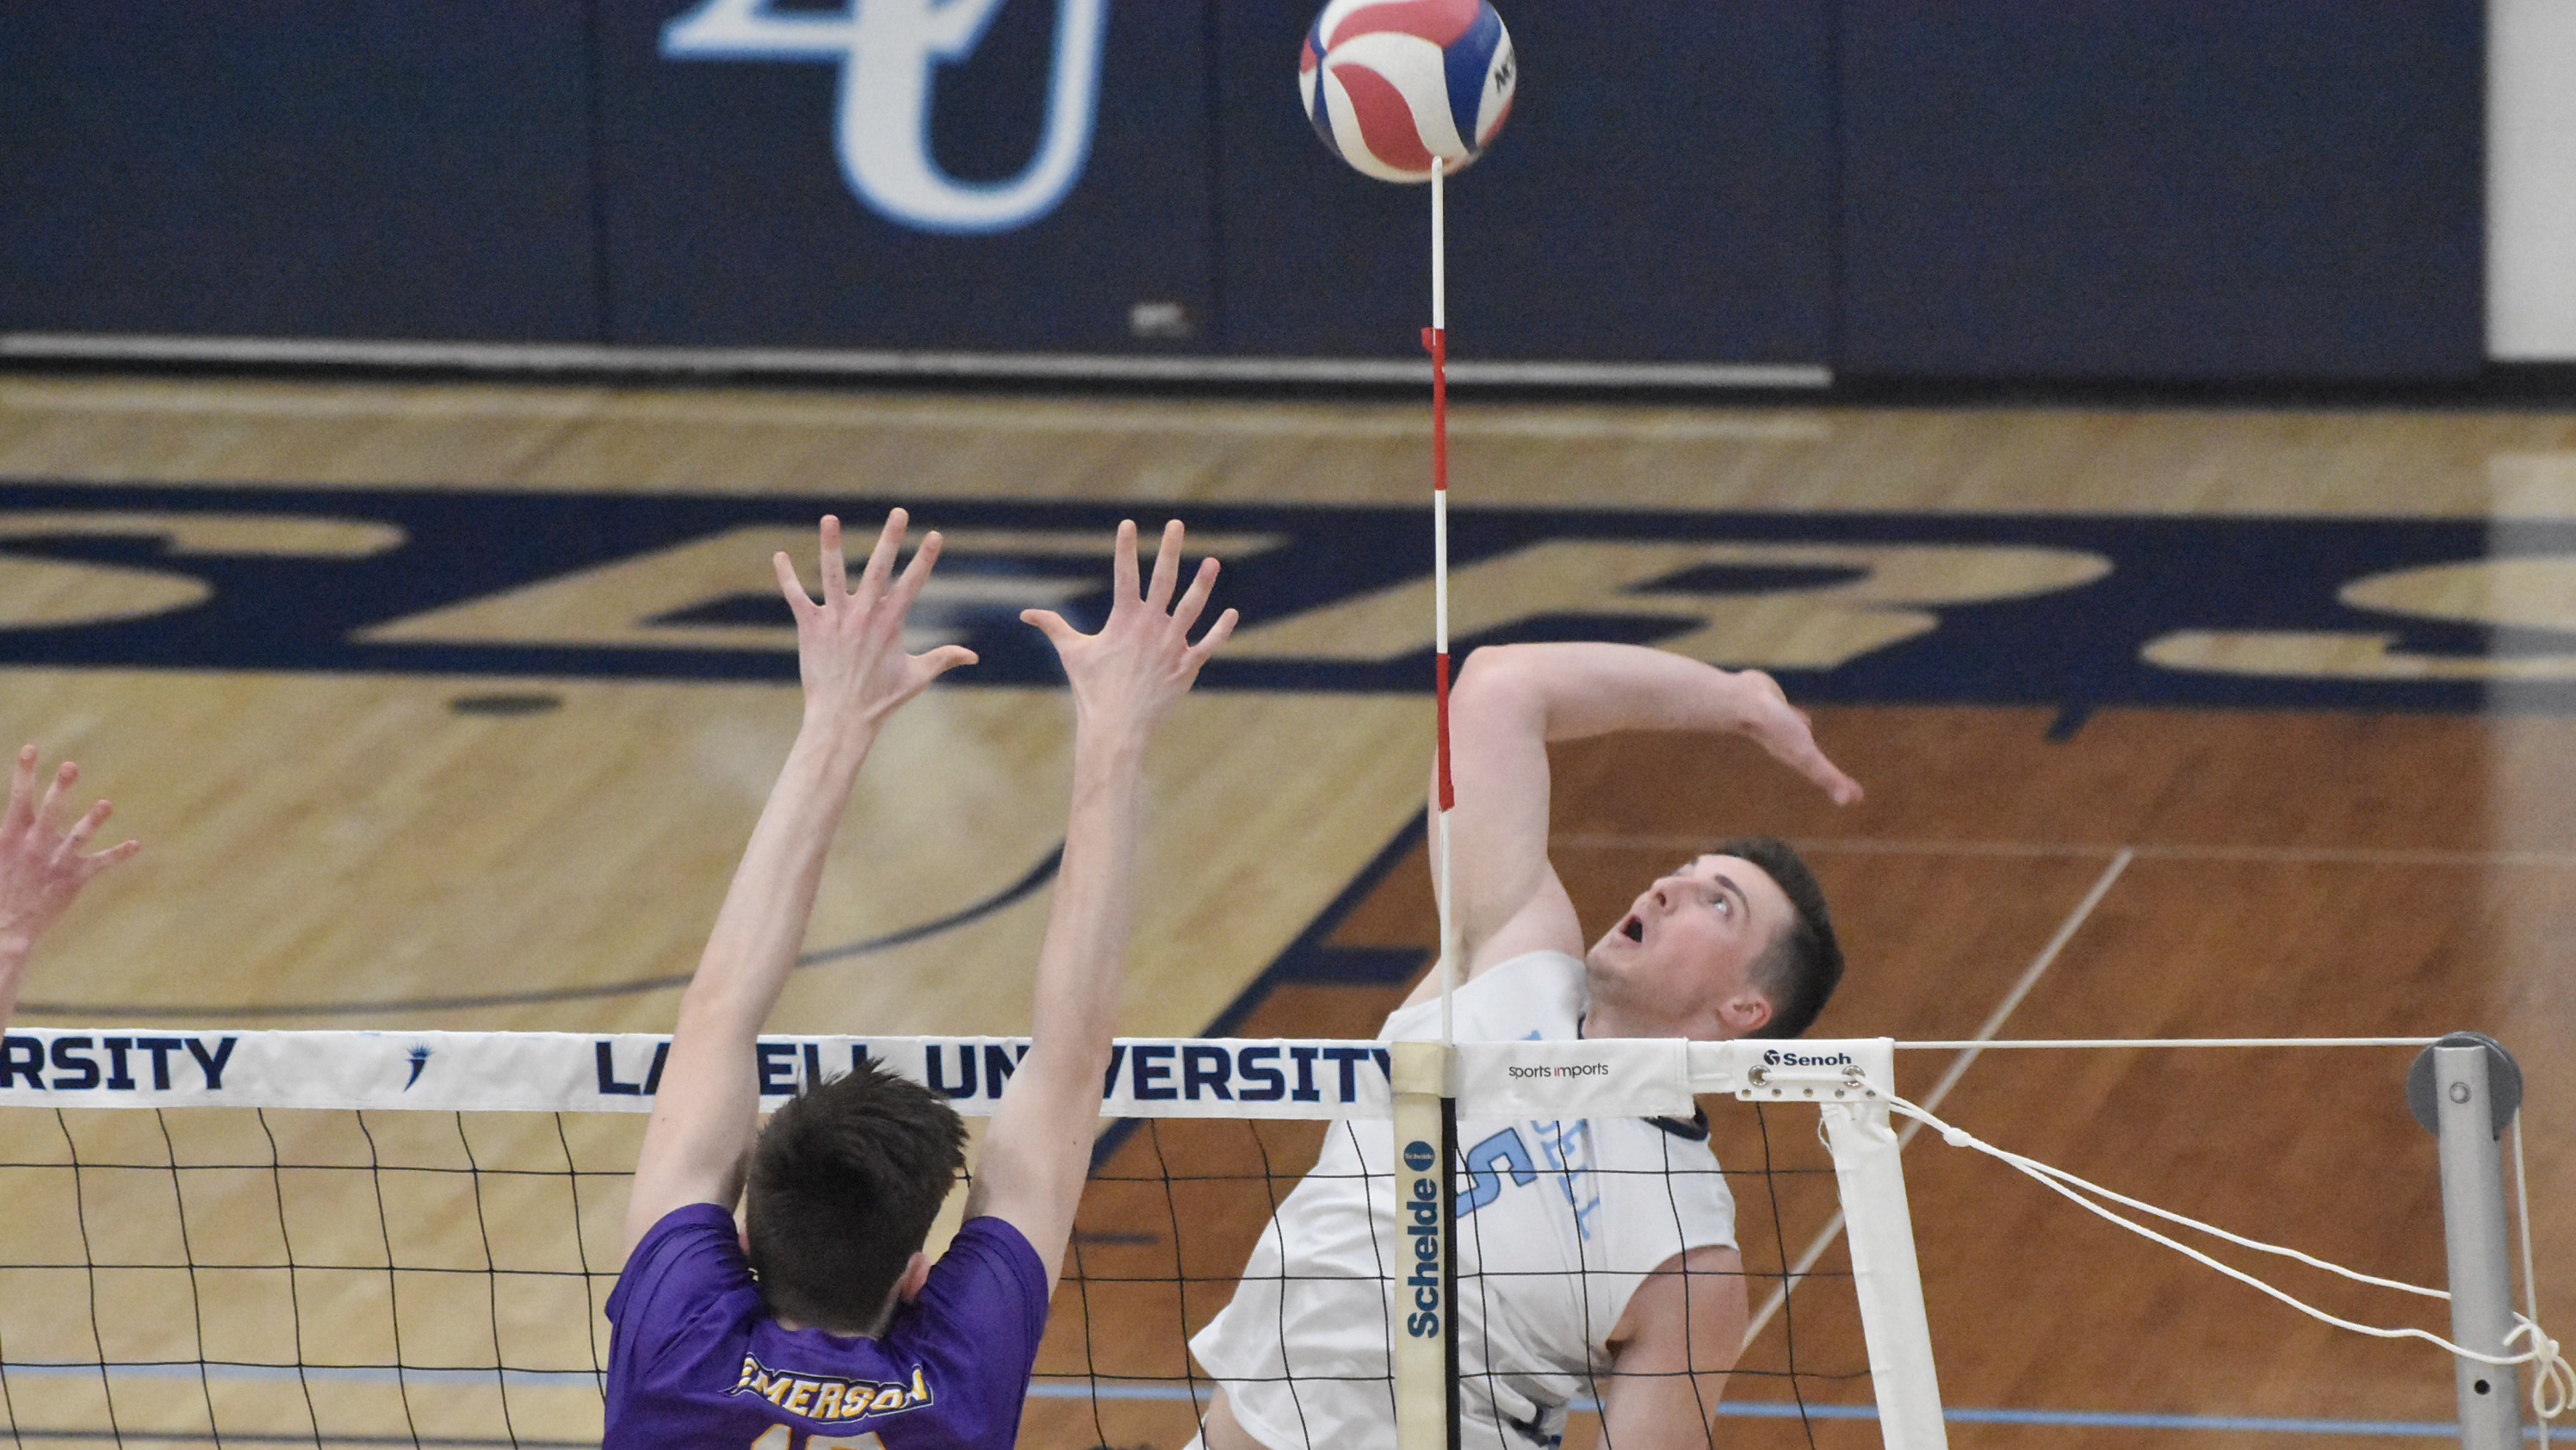 Men's Volleyball: Shinaut and Merritt lead Lasell to season sweep of Emerson